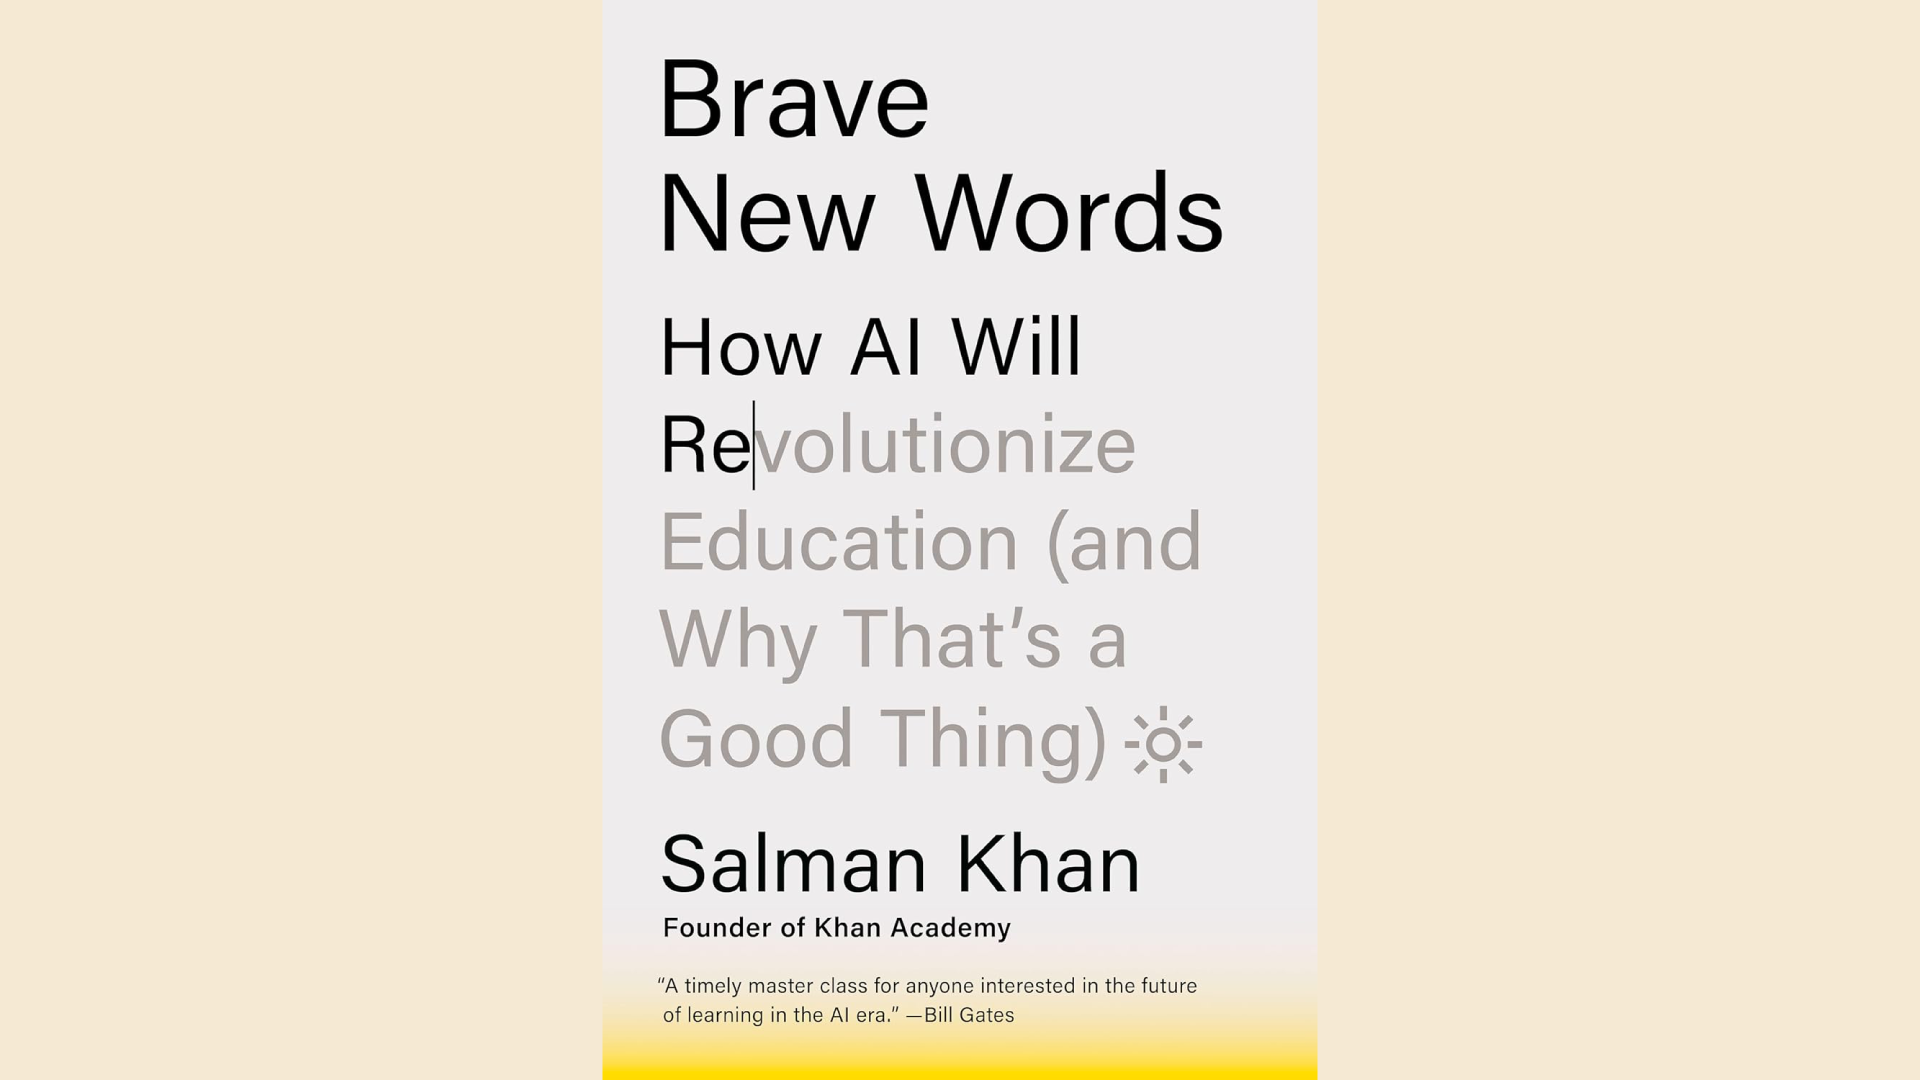 Summary: Brave New Words by Sal Khan